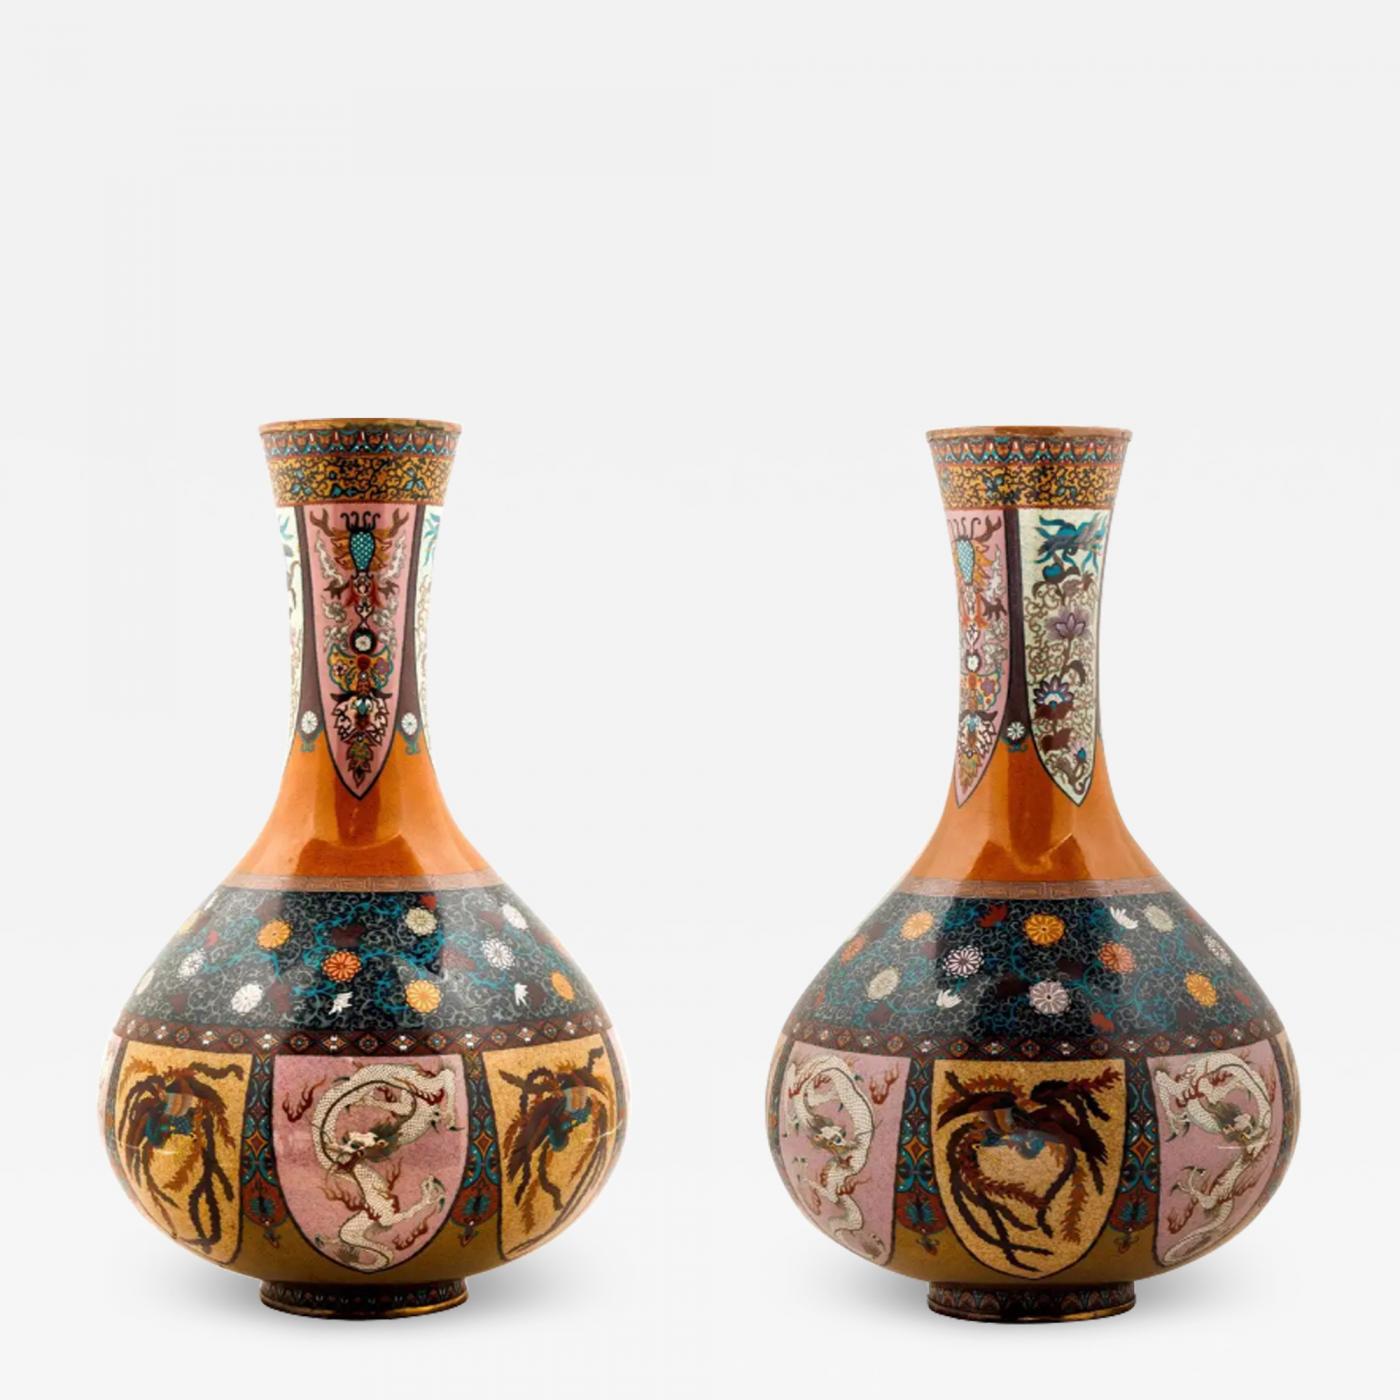 Large Pair of Japanese Cloisonne Enamel Vases Attributed to